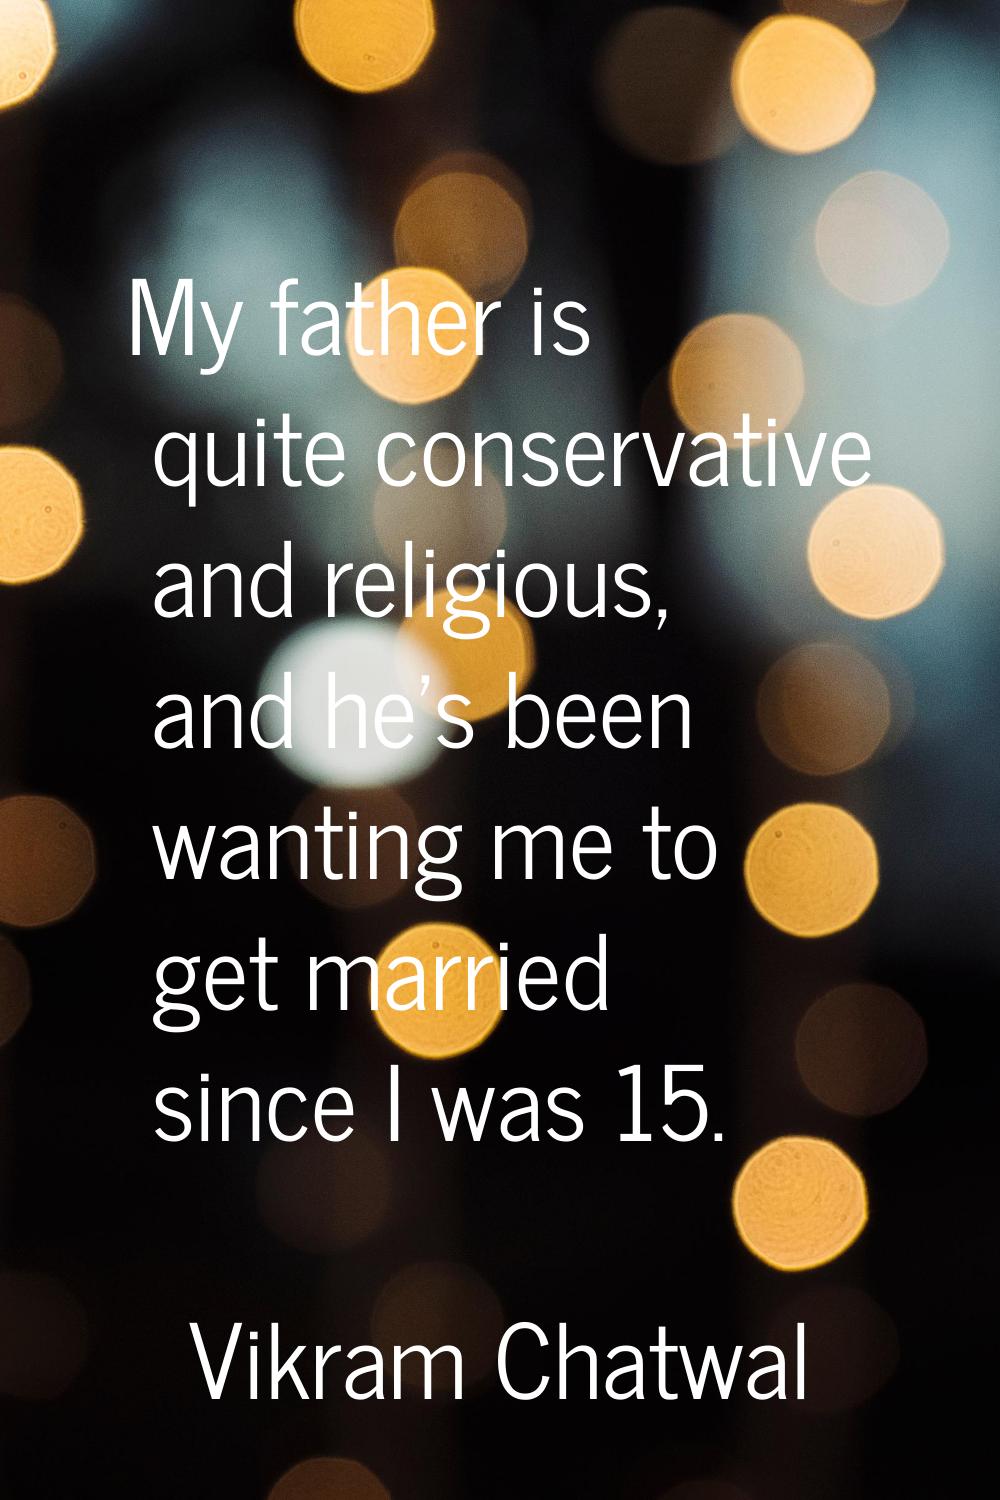 My father is quite conservative and religious, and he's been wanting me to get married since I was 